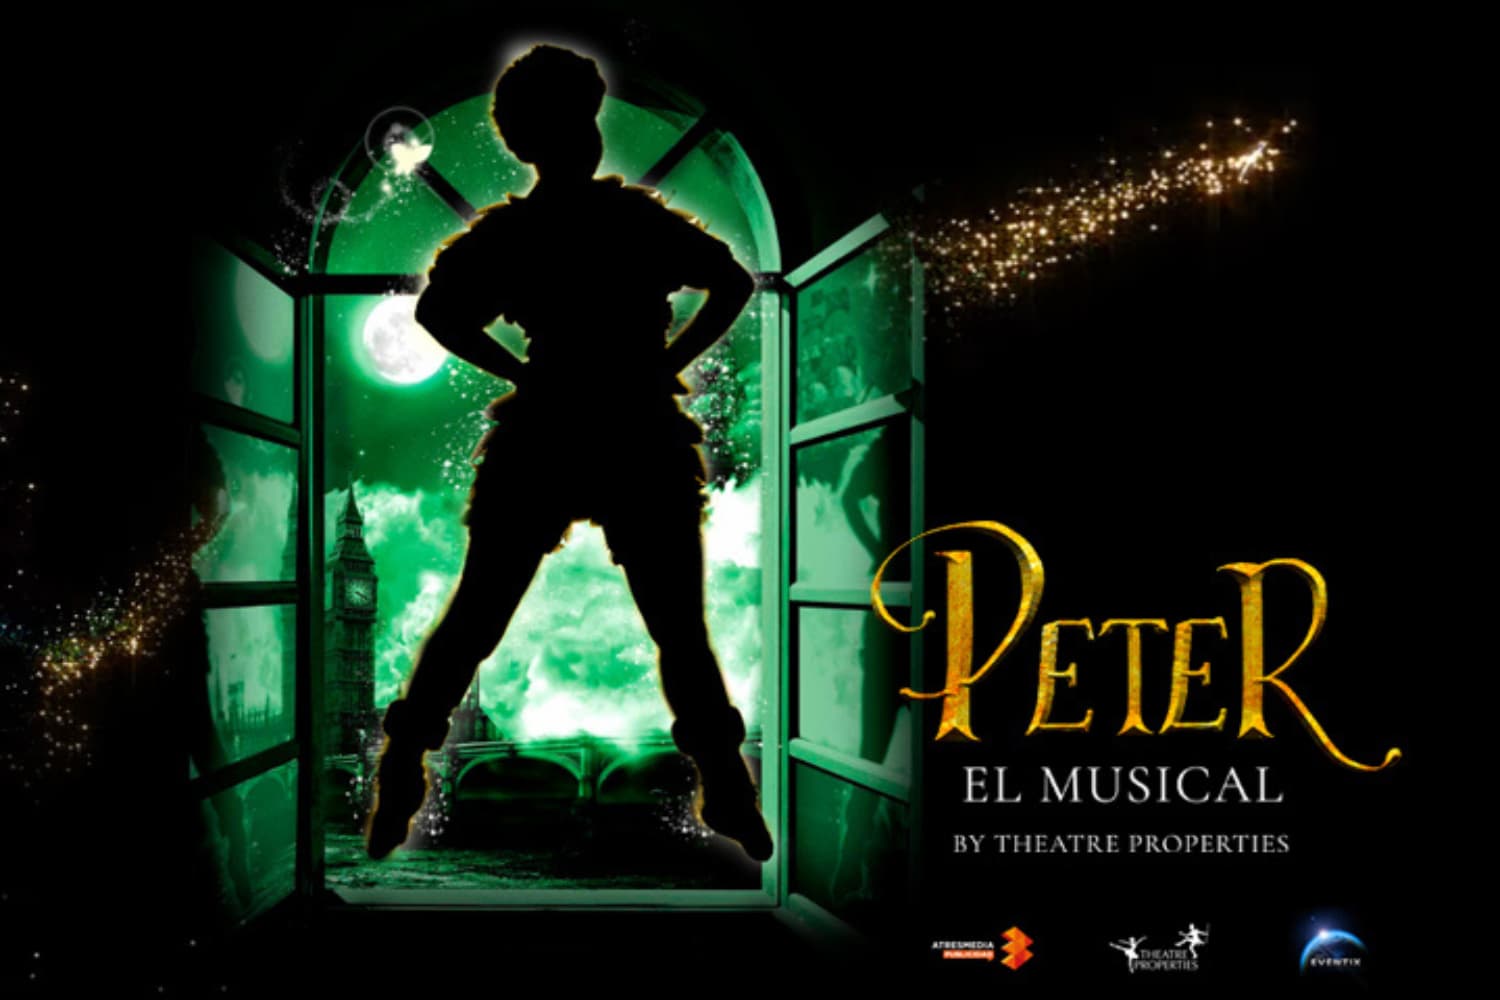 Peter the musical